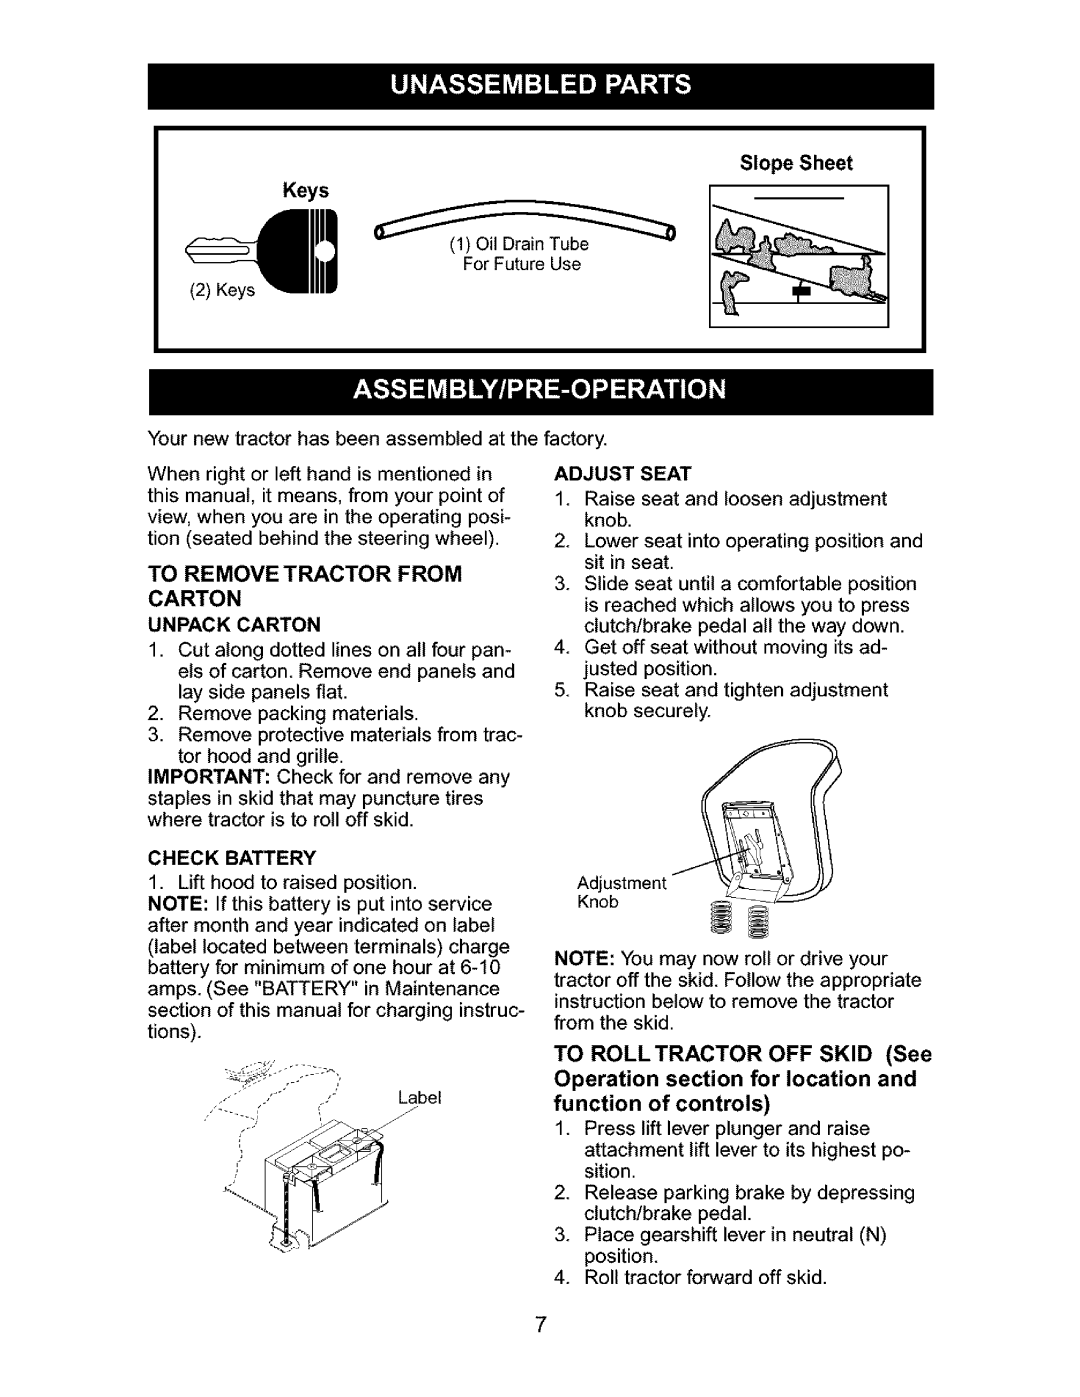 Craftsman 917.27631 owner manual To Remove Tractor From Carton, of controls, Slope Sheet Keys 